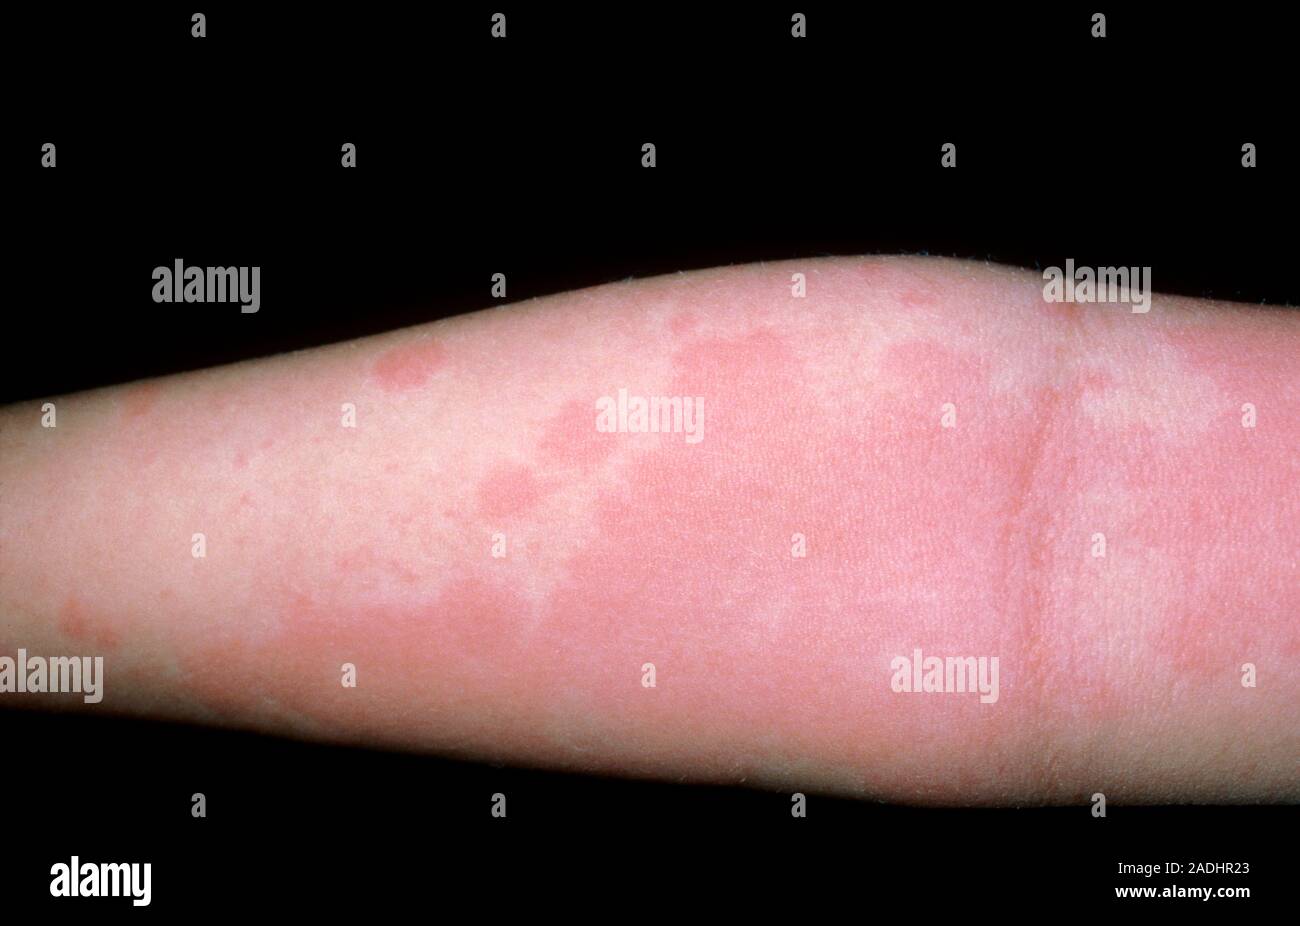 Acute urticaria affecting an arm. Also called hives or nettle rash, urticaria is a transient swelling and/or flushing of the skin. The underlying vaso Stock Photo